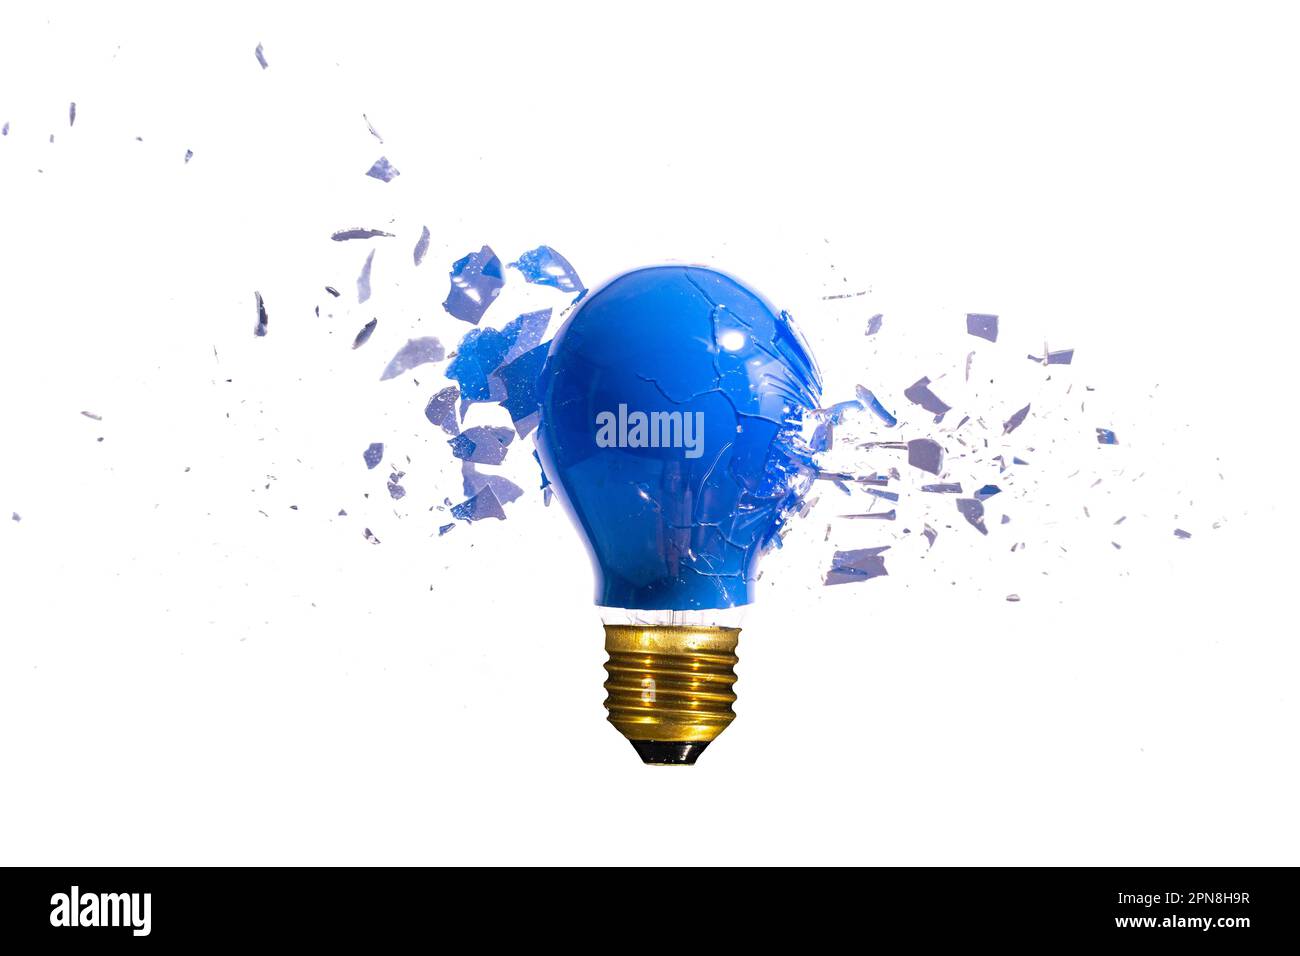 traditional blue light bulb breaks on the white background Stock Photo